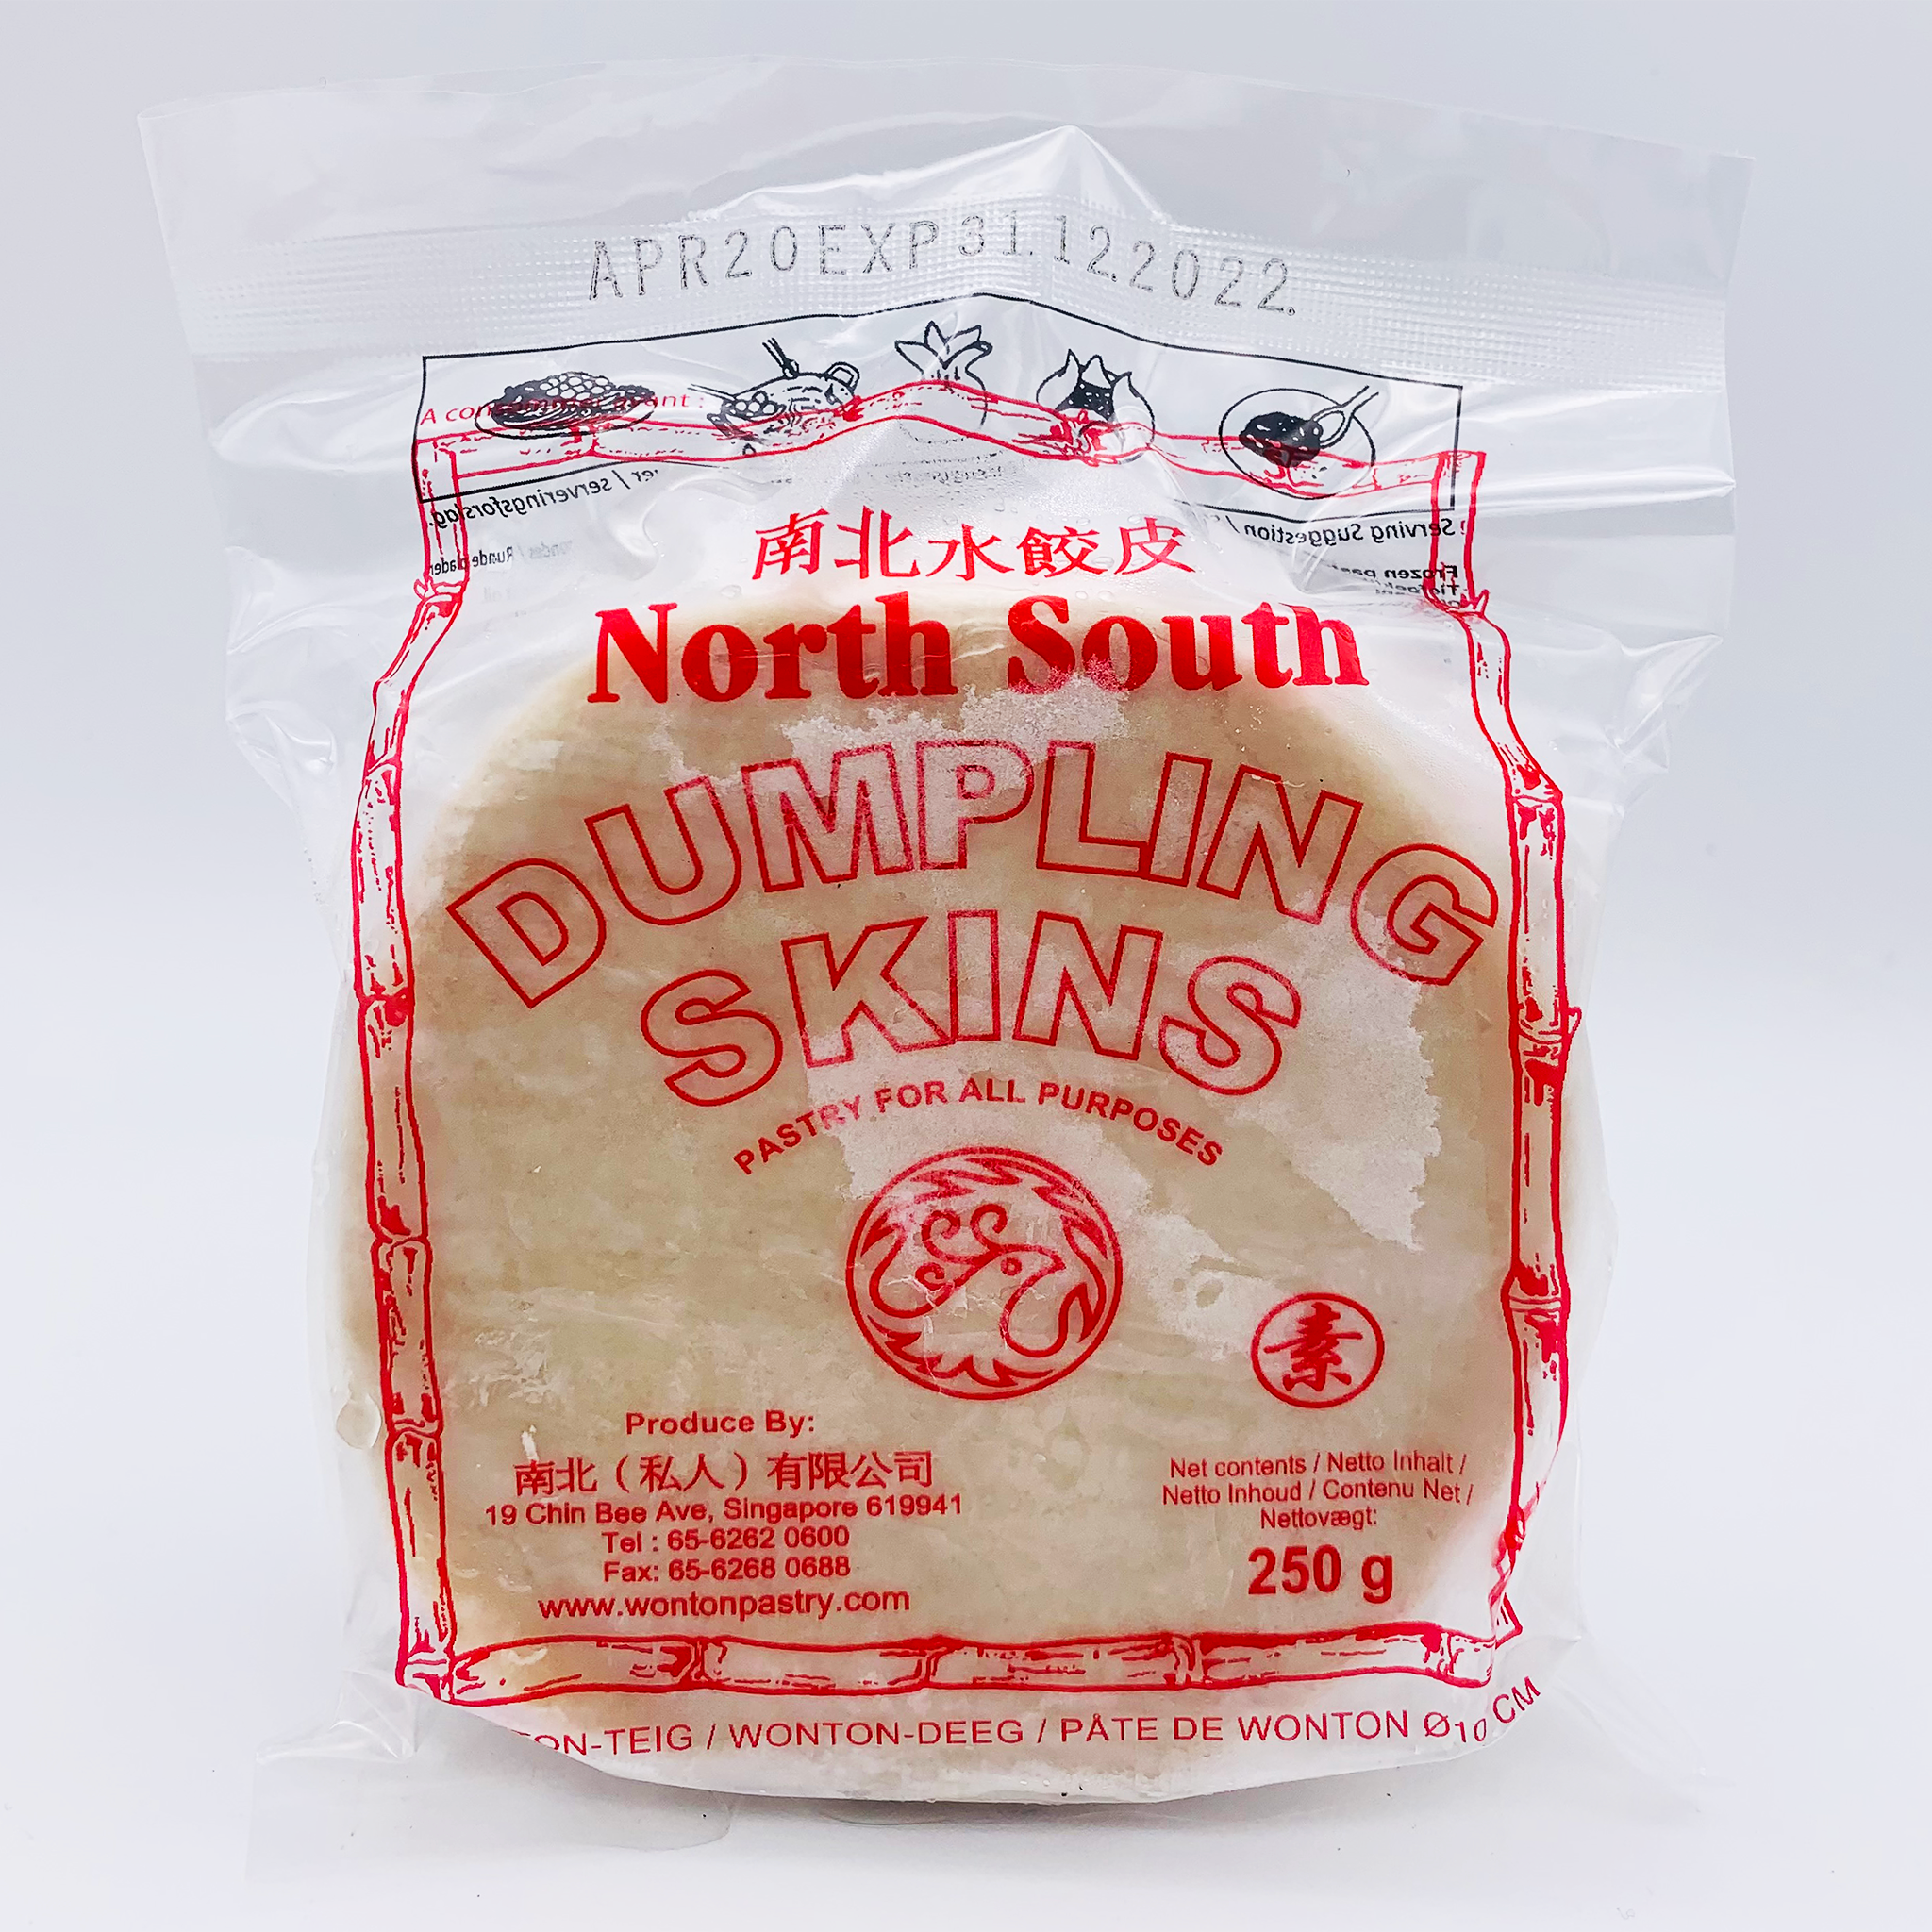 Frozen Gyoza Skins Dumpling Pastry - White and Round 250g by North South